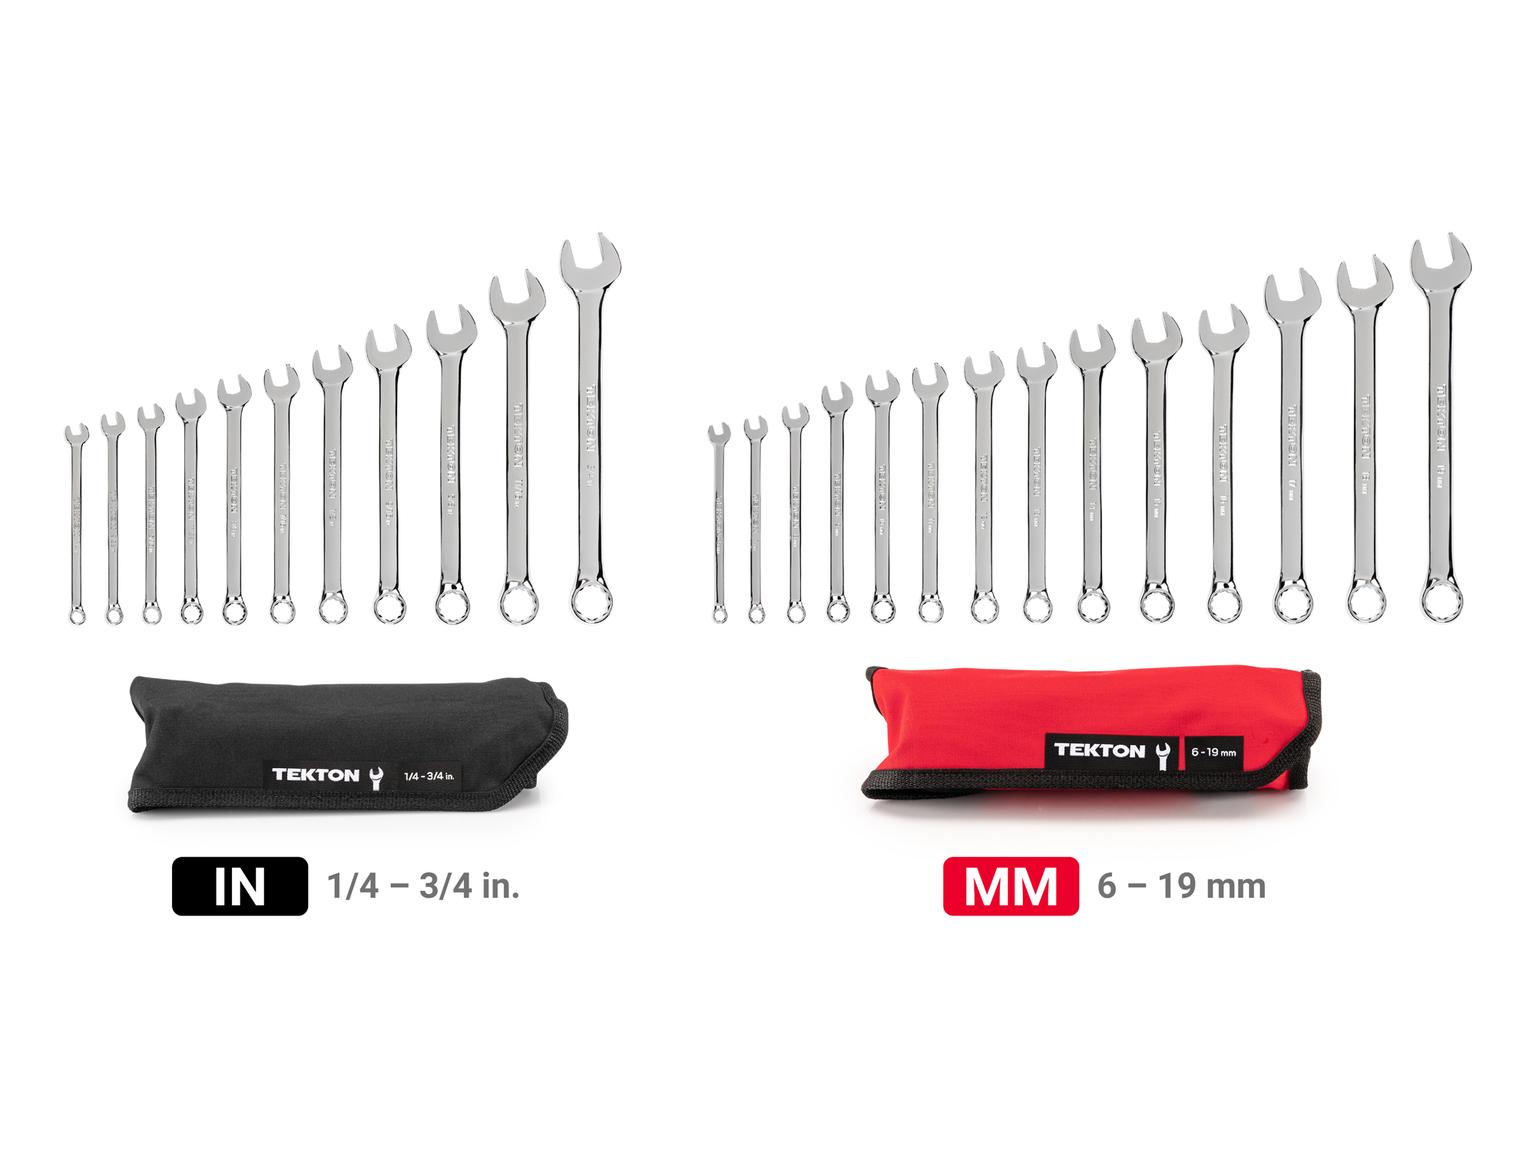 TEKTON WCB94301-T Combination Wrench Set with Pouch, 25-Piece (1/4 - 3/4 in., 6 - 19 mm)